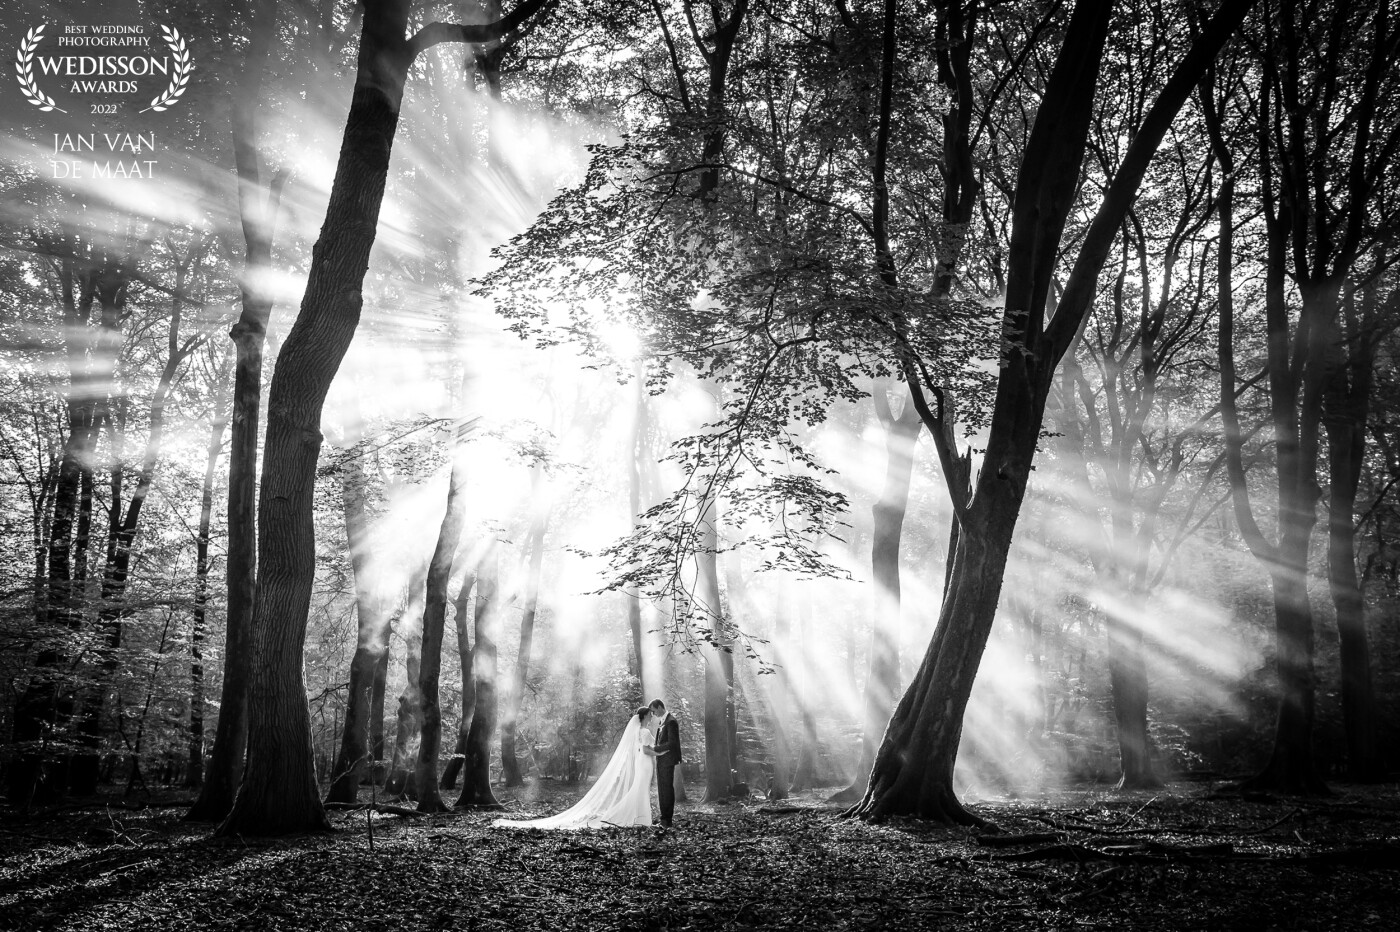 My couple wanted their photo session in the forest. It was the last day of August and we arrived there quite early in the morning. The sun created a beautiful 'splash' of light rays so I only had to lead the couple into the right place and I could take this photo!